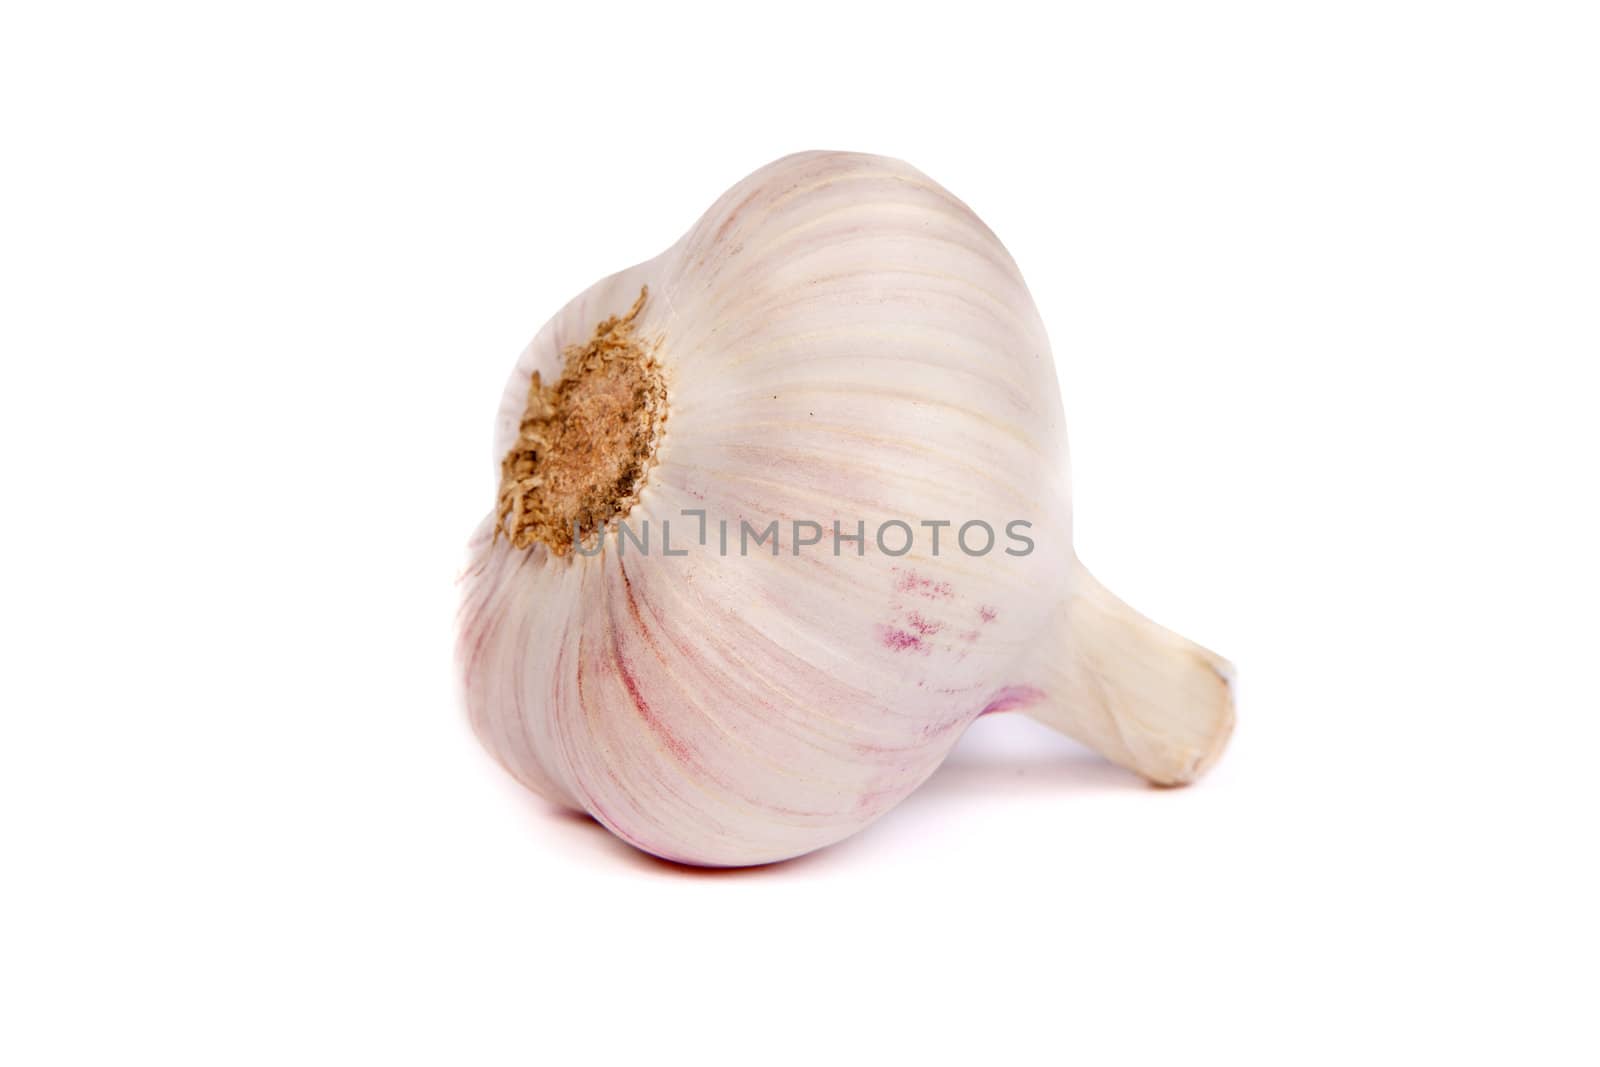 A head of garlic isolated on white by bloodua